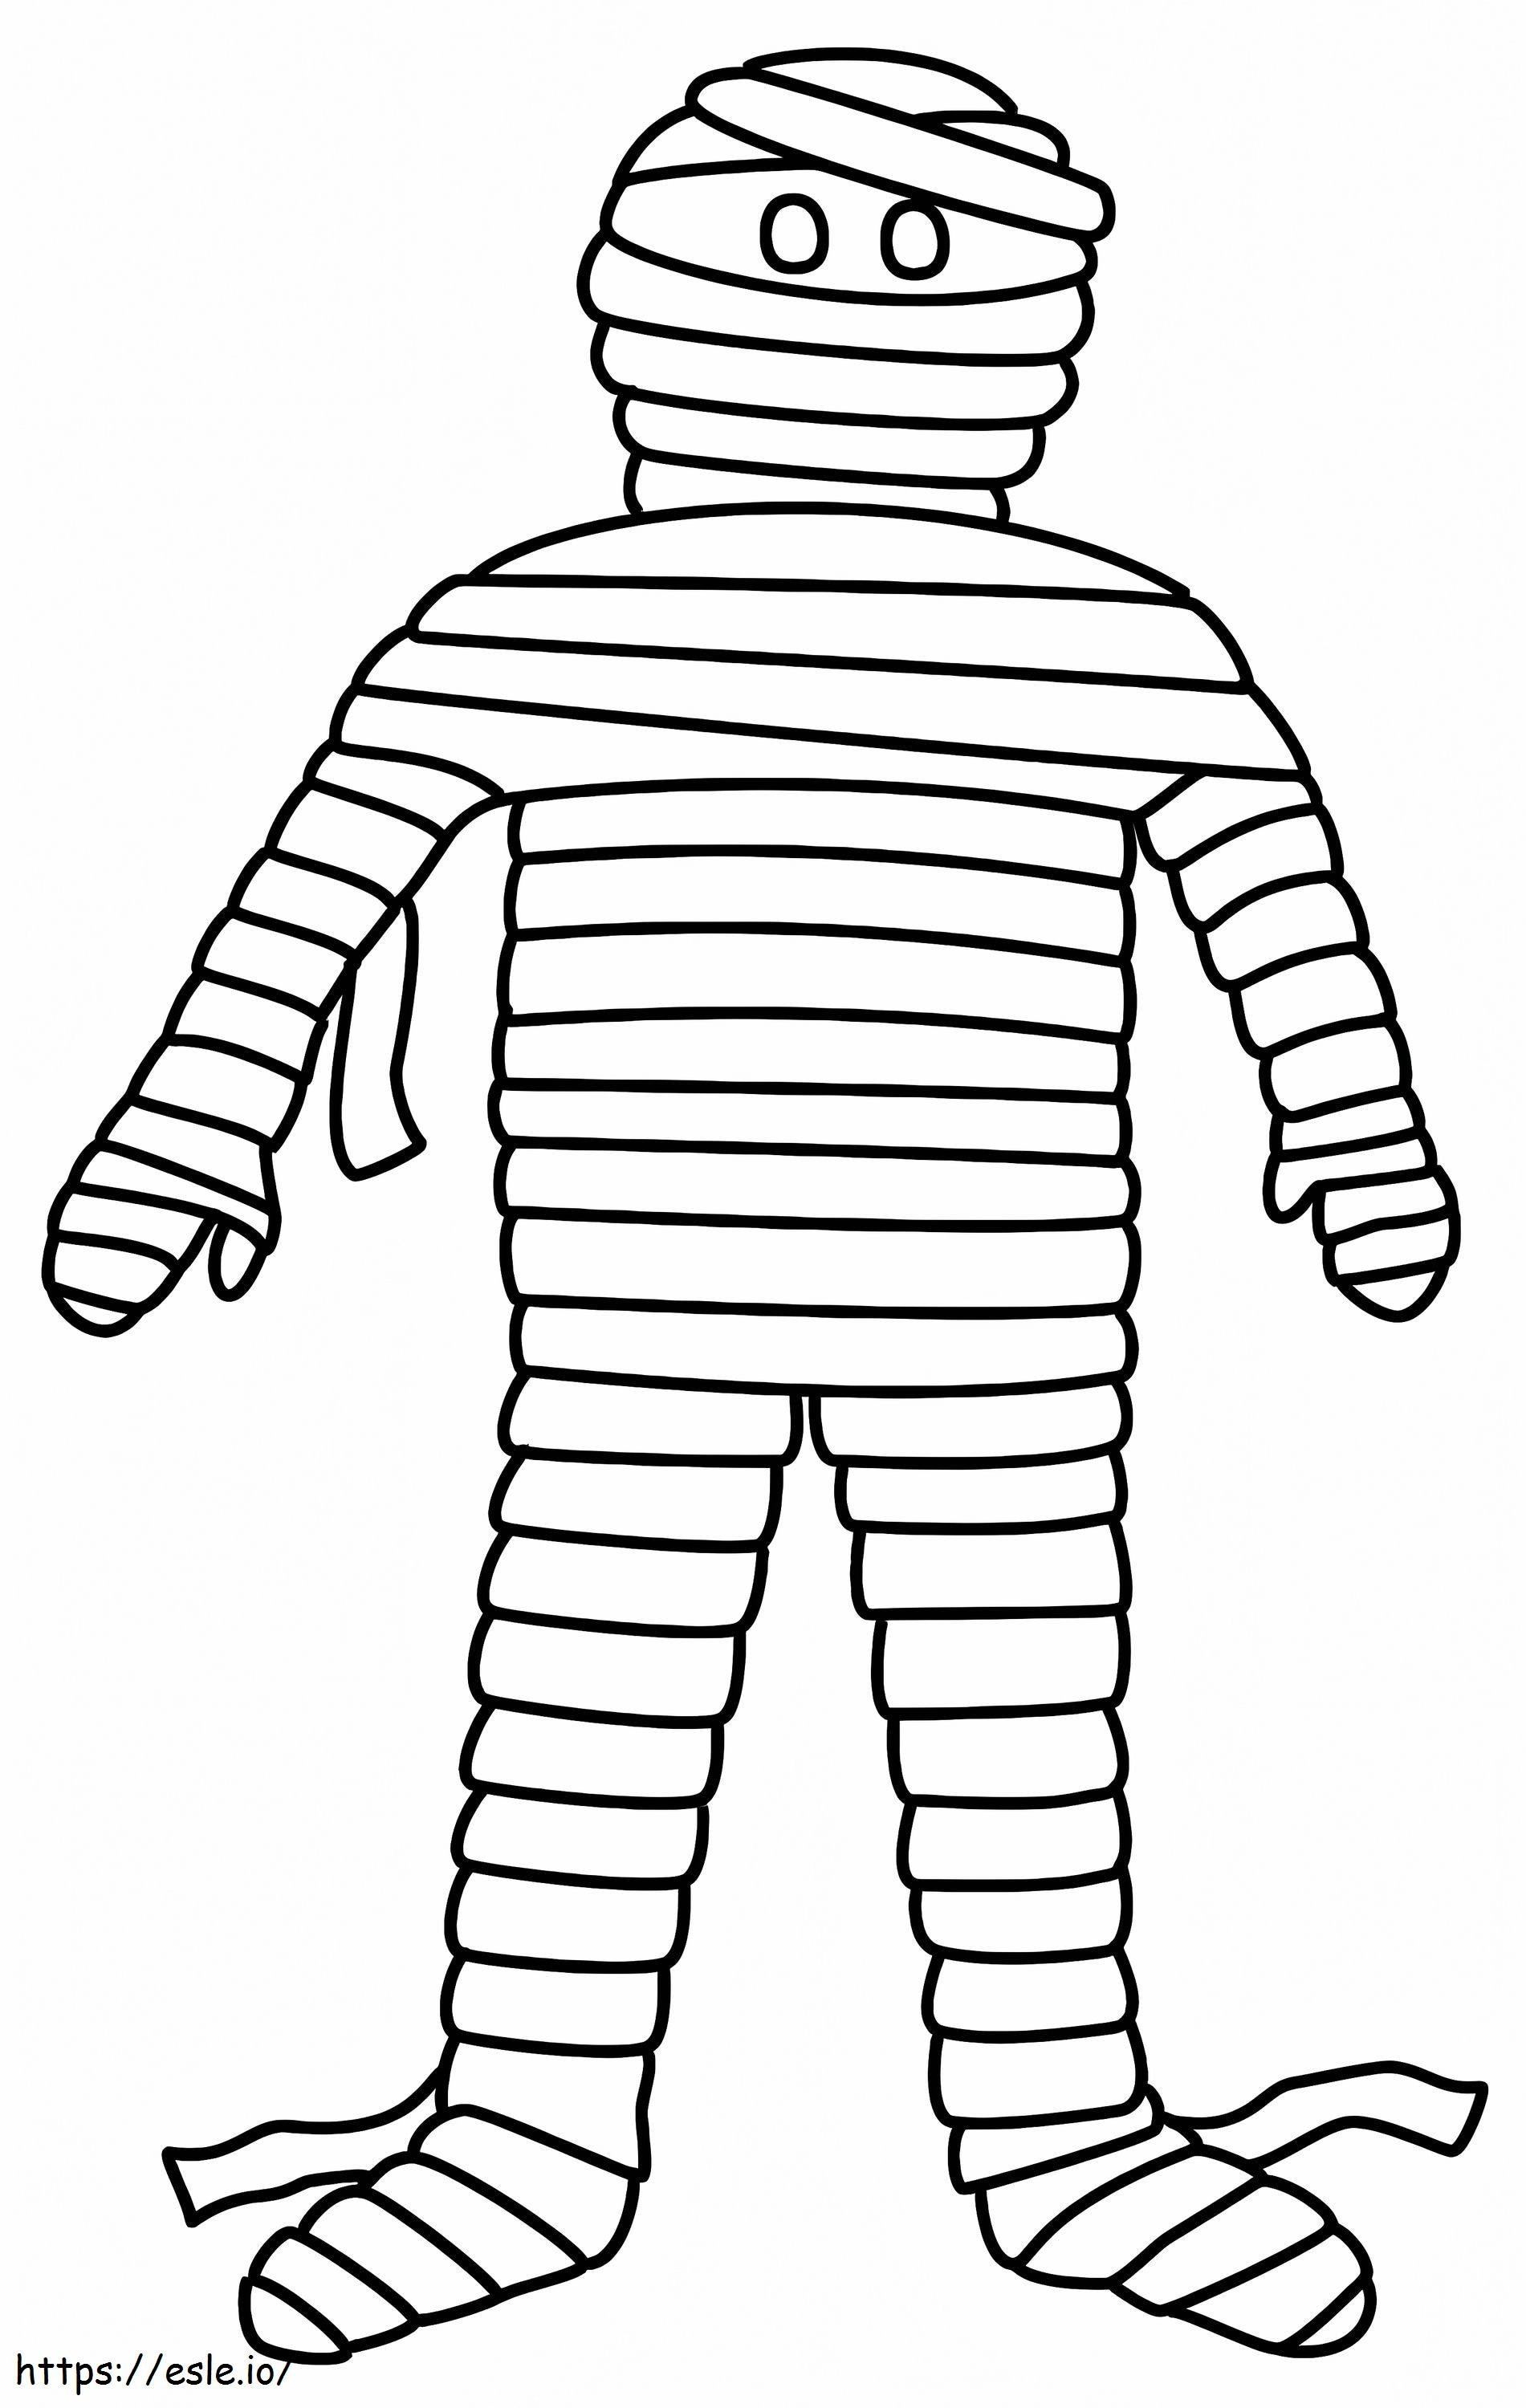 Simple Mummy Coloring Page coloring page